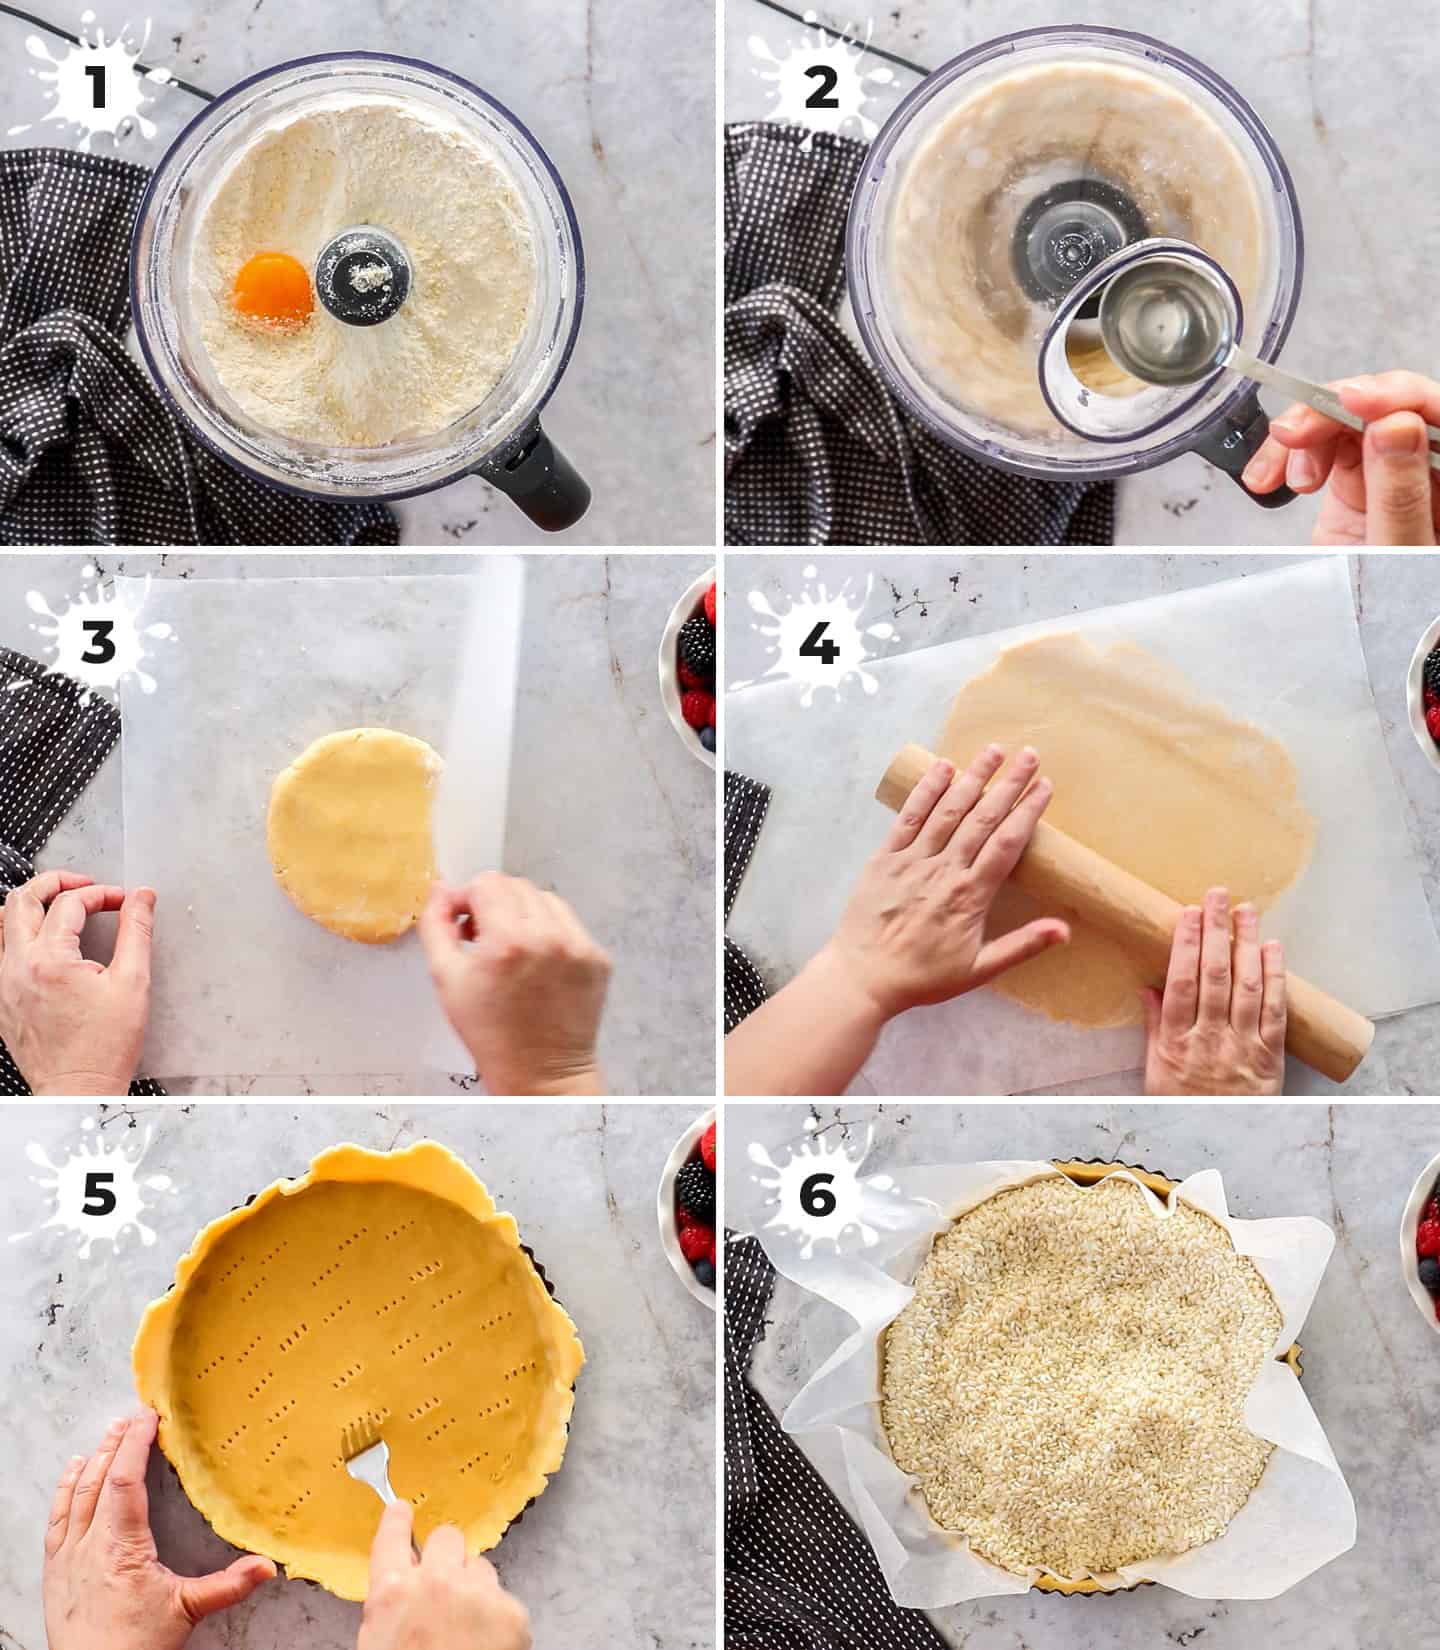 A collage of 6 images showing how to make and prep the tart dough.